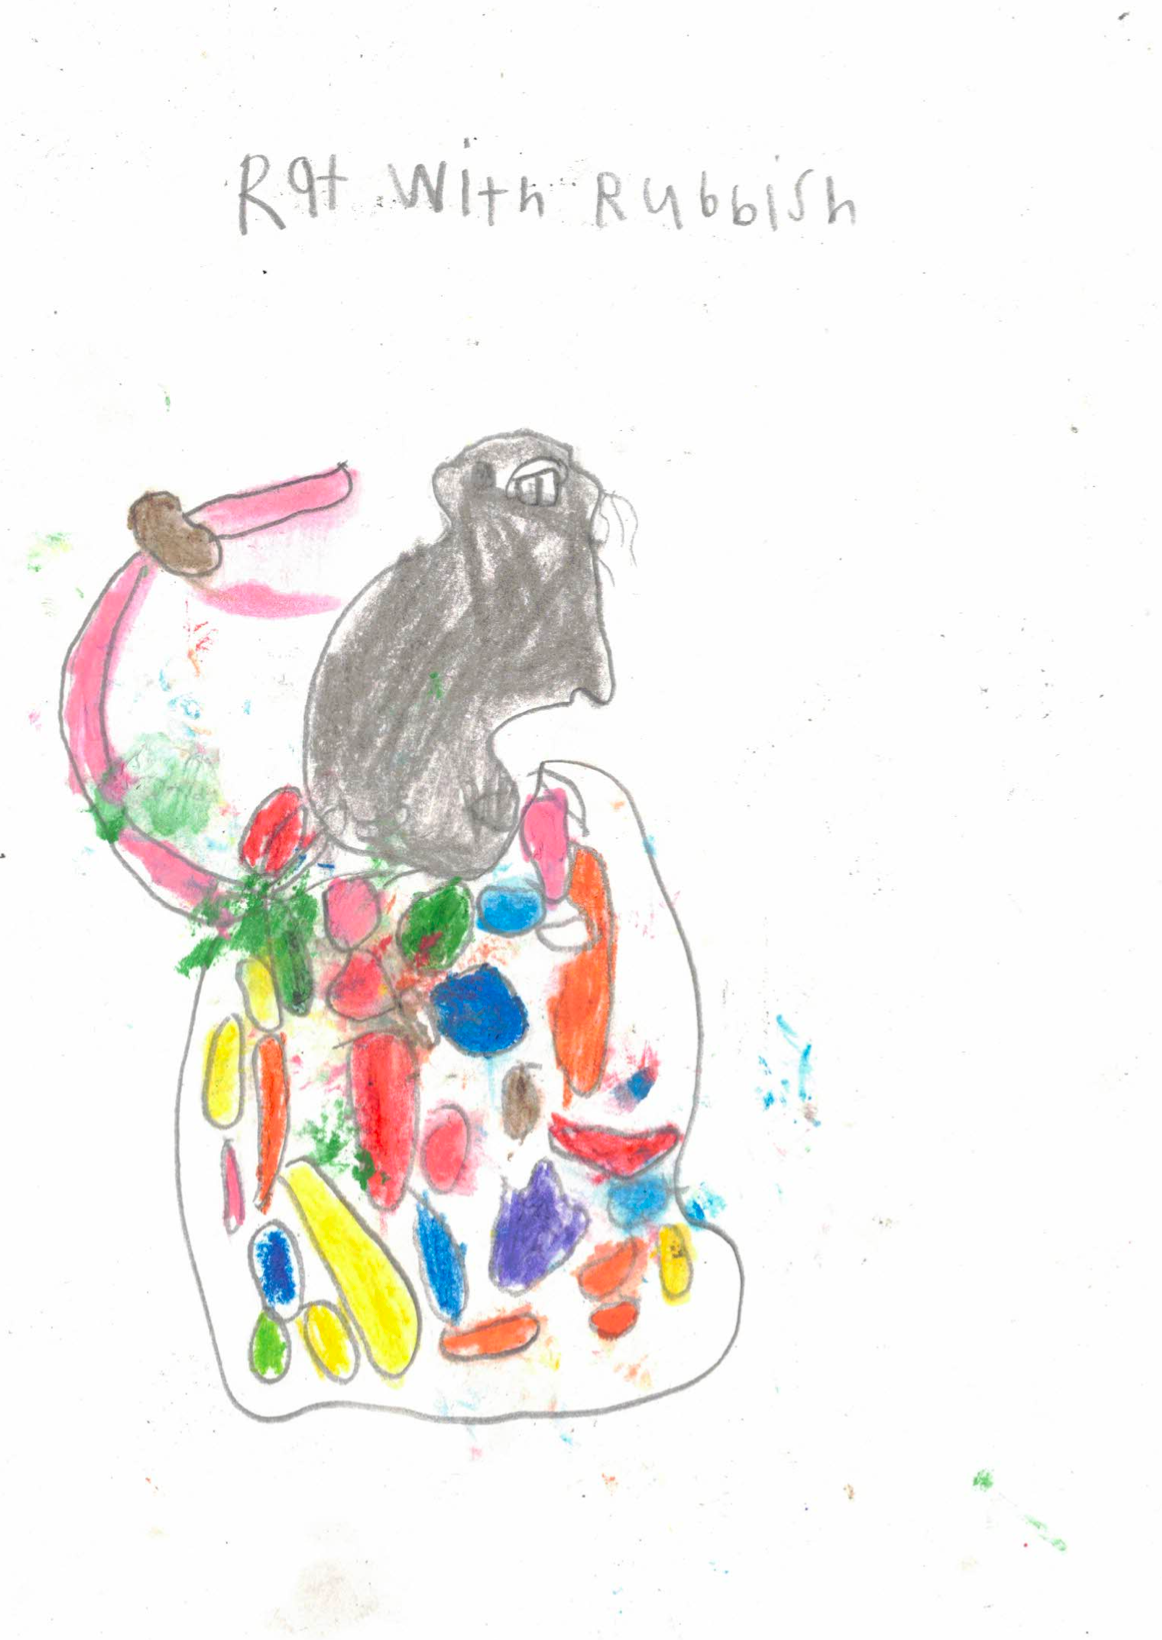 Rosewood+Calder grey rat "Rat with Rubbish" drawing, the rat's standing on top a mass of floating, colorful fruit